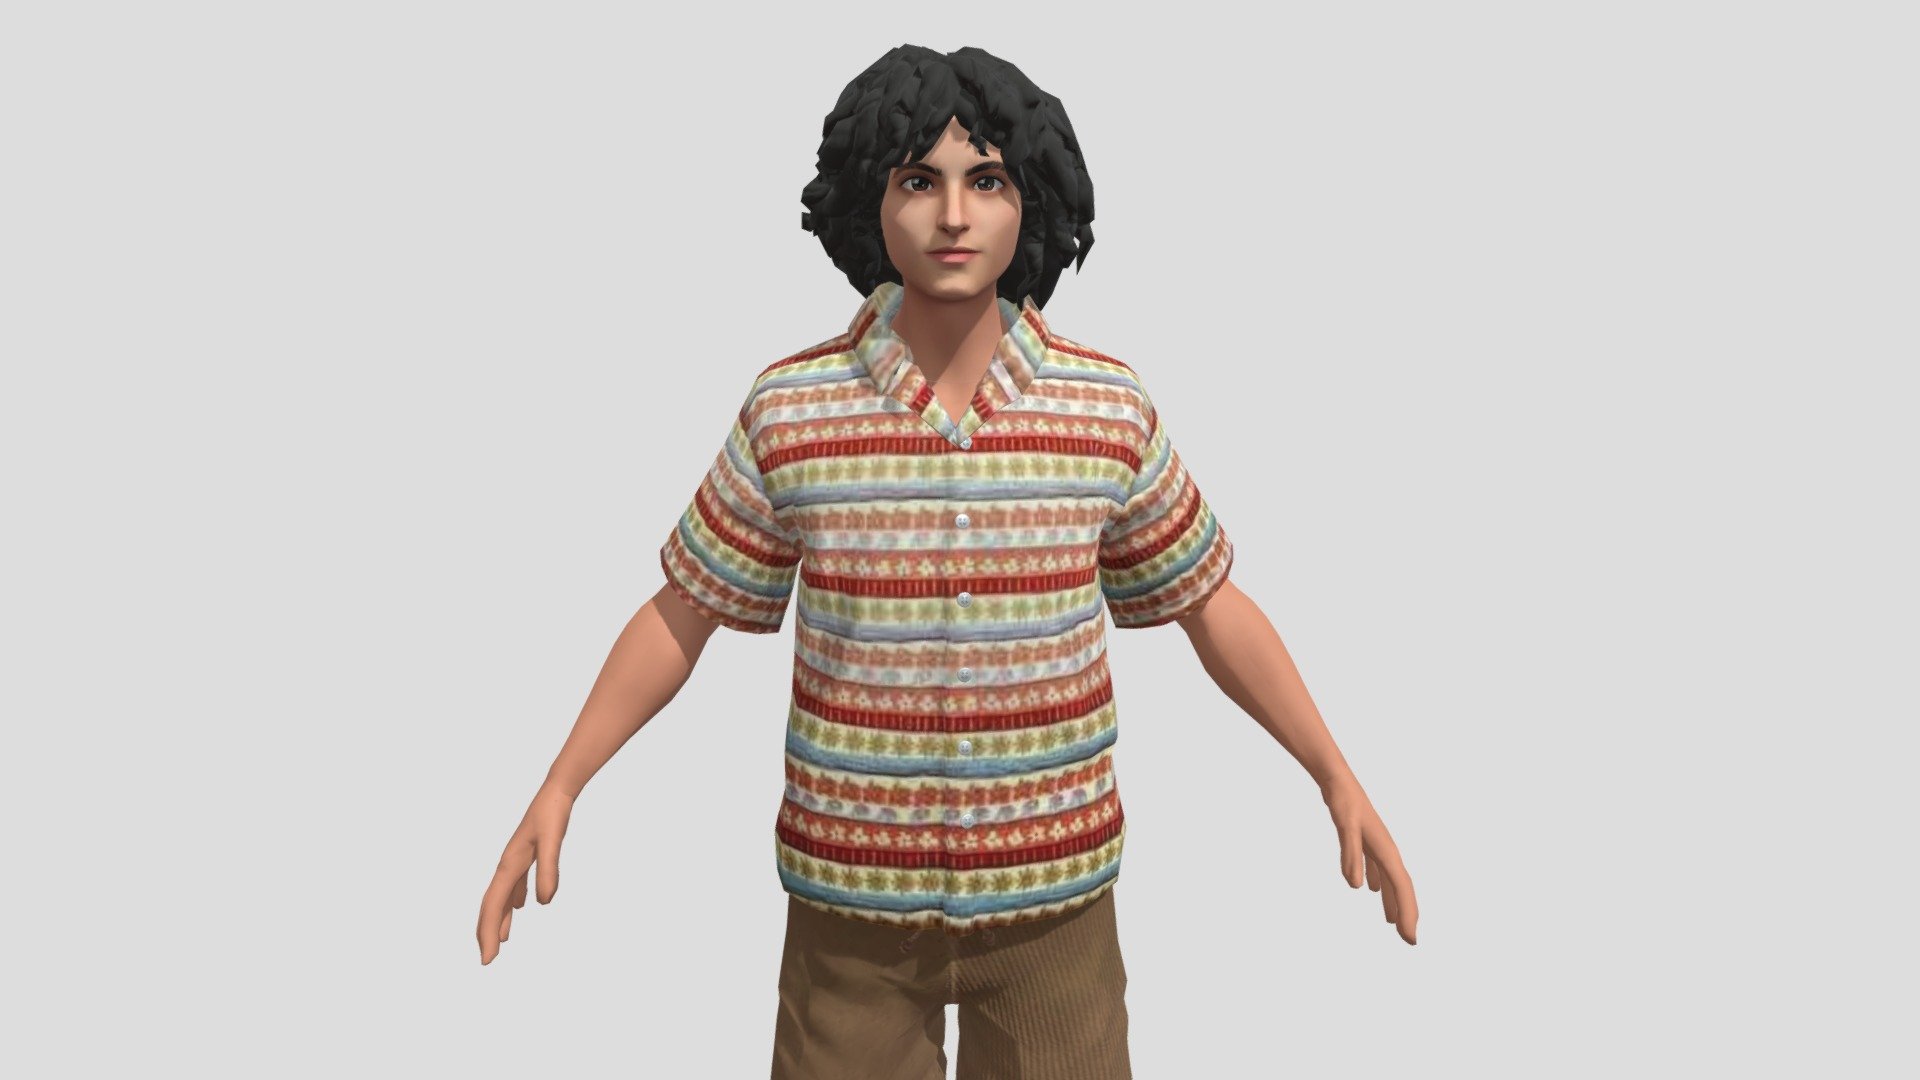 mike wheeler 3d model from stranger things.
Stranger Things is a popular Netflix series that features a group of young friends who encounter supernatural forces and secret government experiments in their hometown of Hawkins, Indiana. The show is set in the 1980s and pays homage to the sci-fi and horror genres of that era. One of the main elements of the show is the Upside Down, a dark and twisted dimension that mirrors the normal world, but is filled with monsters, decay, and danger 3d model